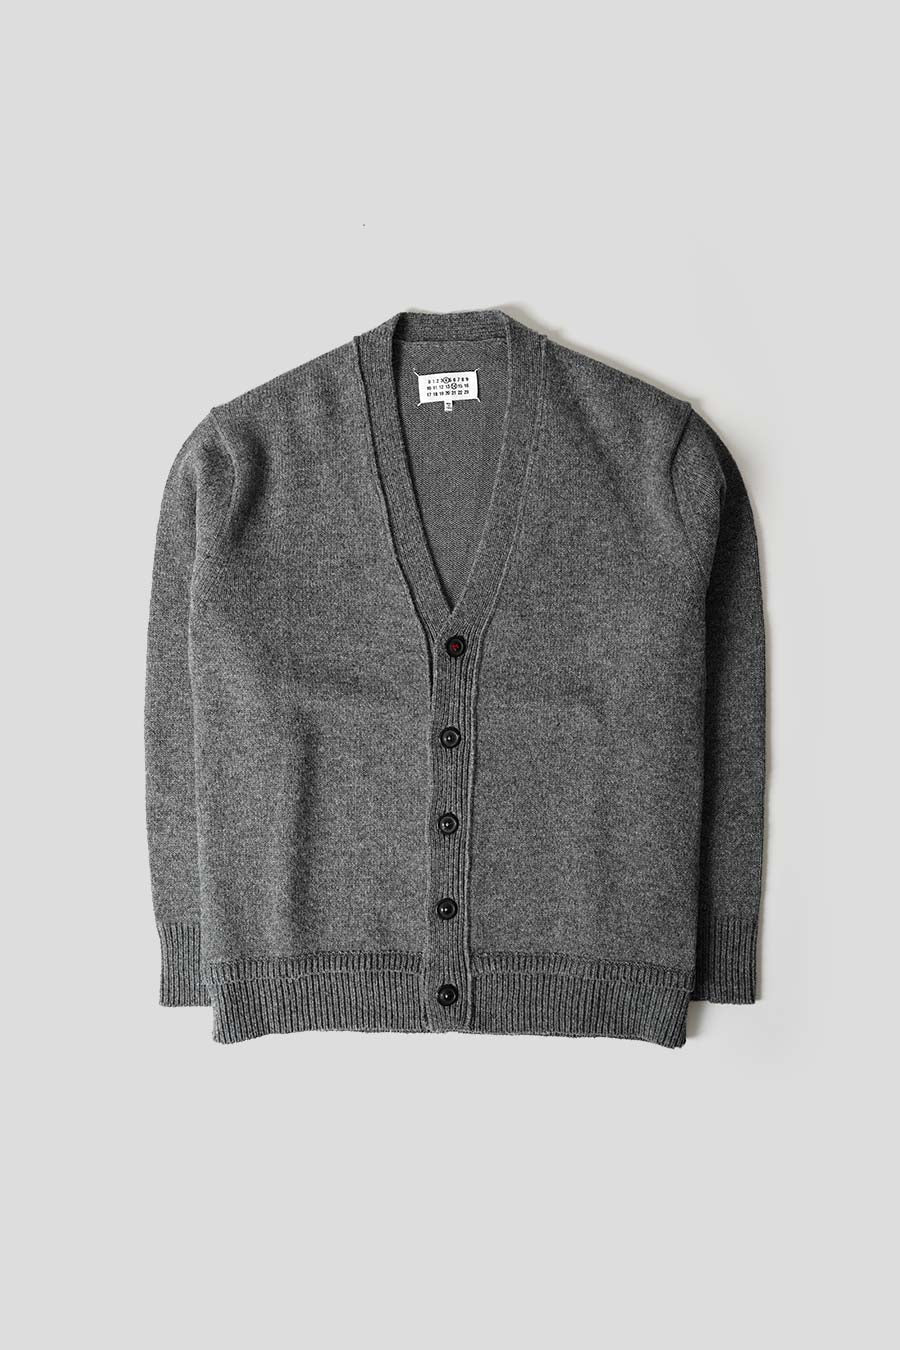 Maison Margiela - CARDIGAN WITH GREY ELBOW PATCHES - LE LABO STORE